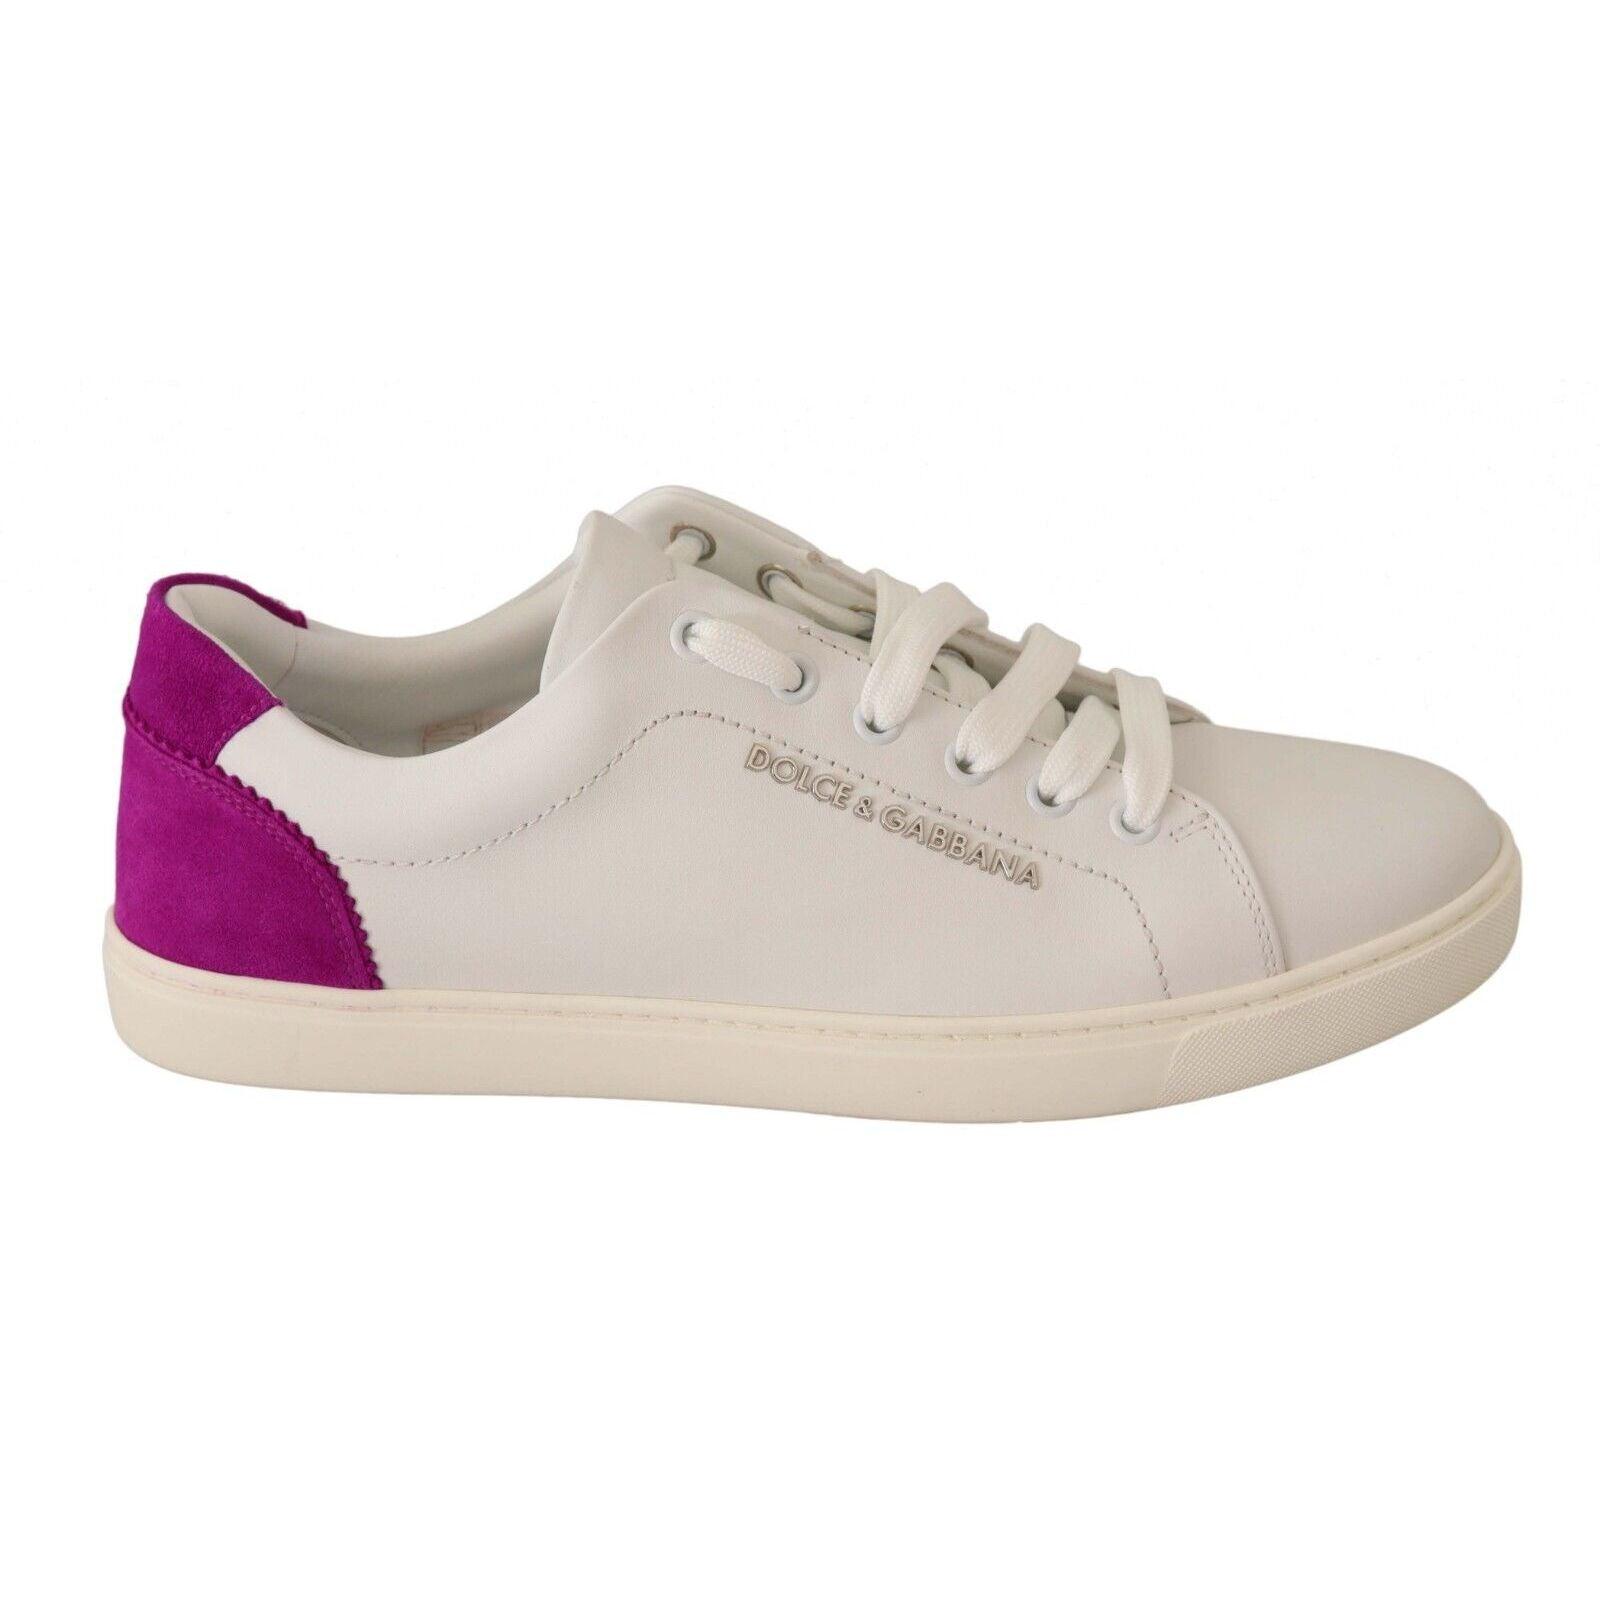 Dolce & Gabbana White Purple Leather Logo S Sneakers Shoes in Black | Lyst